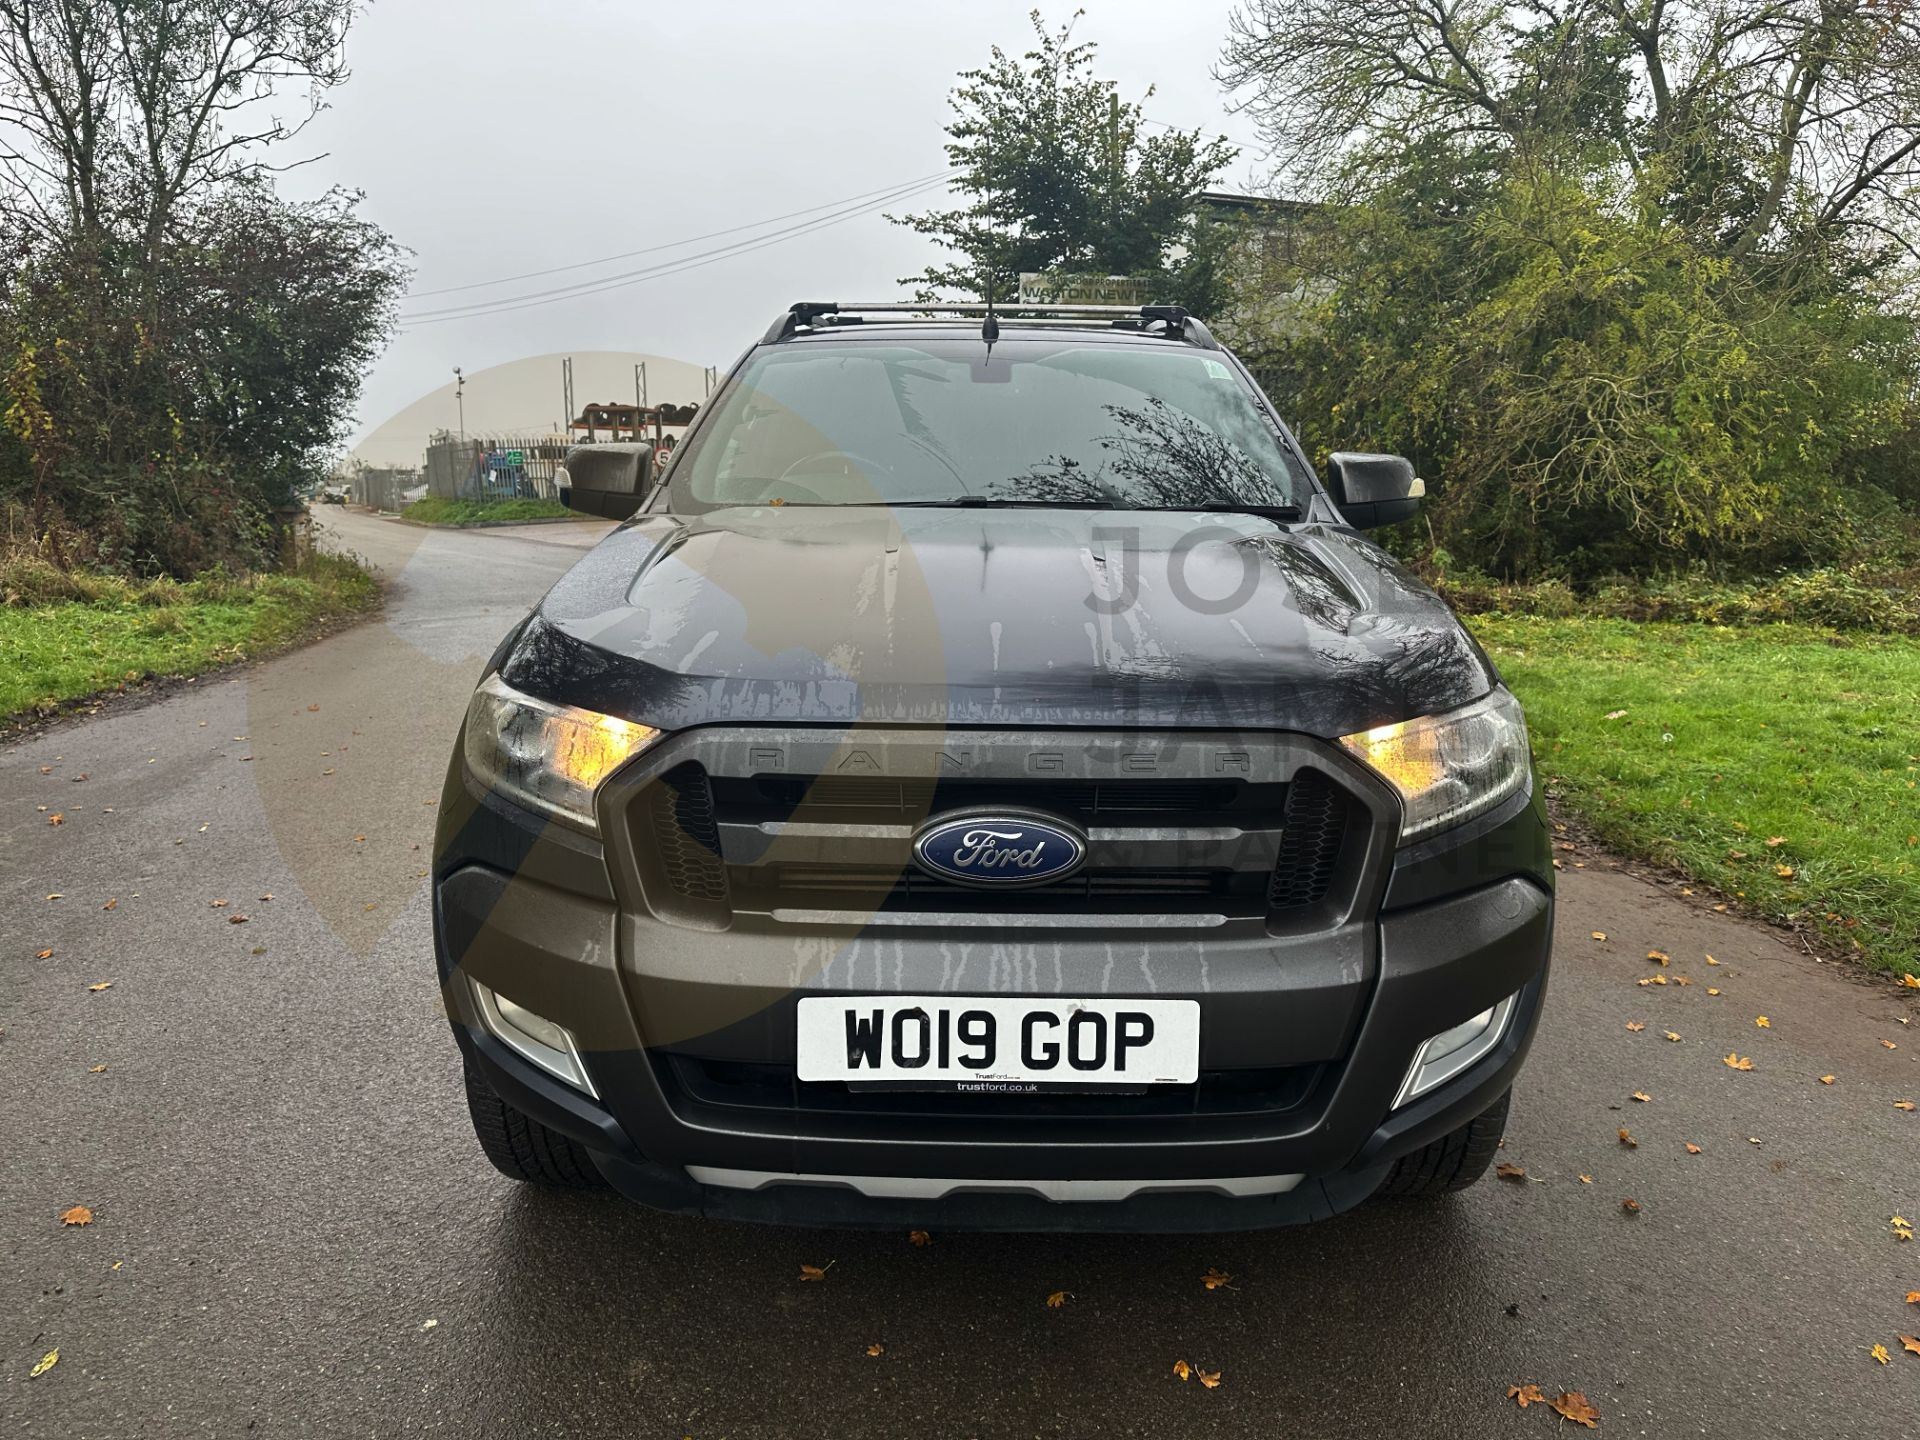 FORD RANGER *WILDTRAK EDITION* DOUBLE CAB PICK-UP (2019 - EURO 6) 3.2 TDCI - AUTOMATIC (1 OWNER) - Image 4 of 52